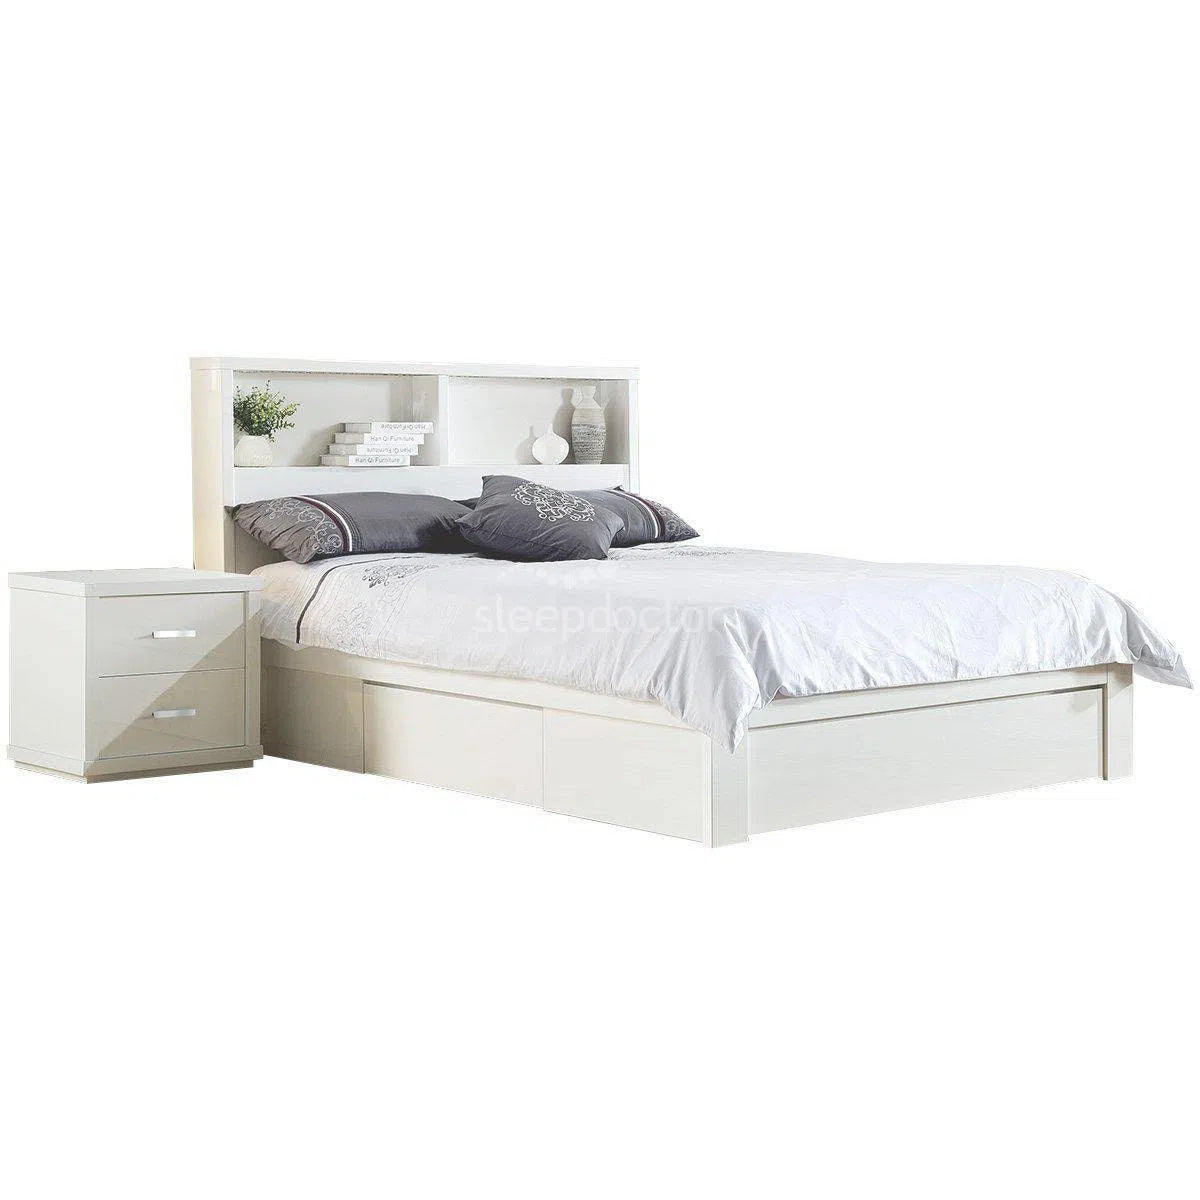 Stanly Storage Bed with Drawers-Sleep Doctor